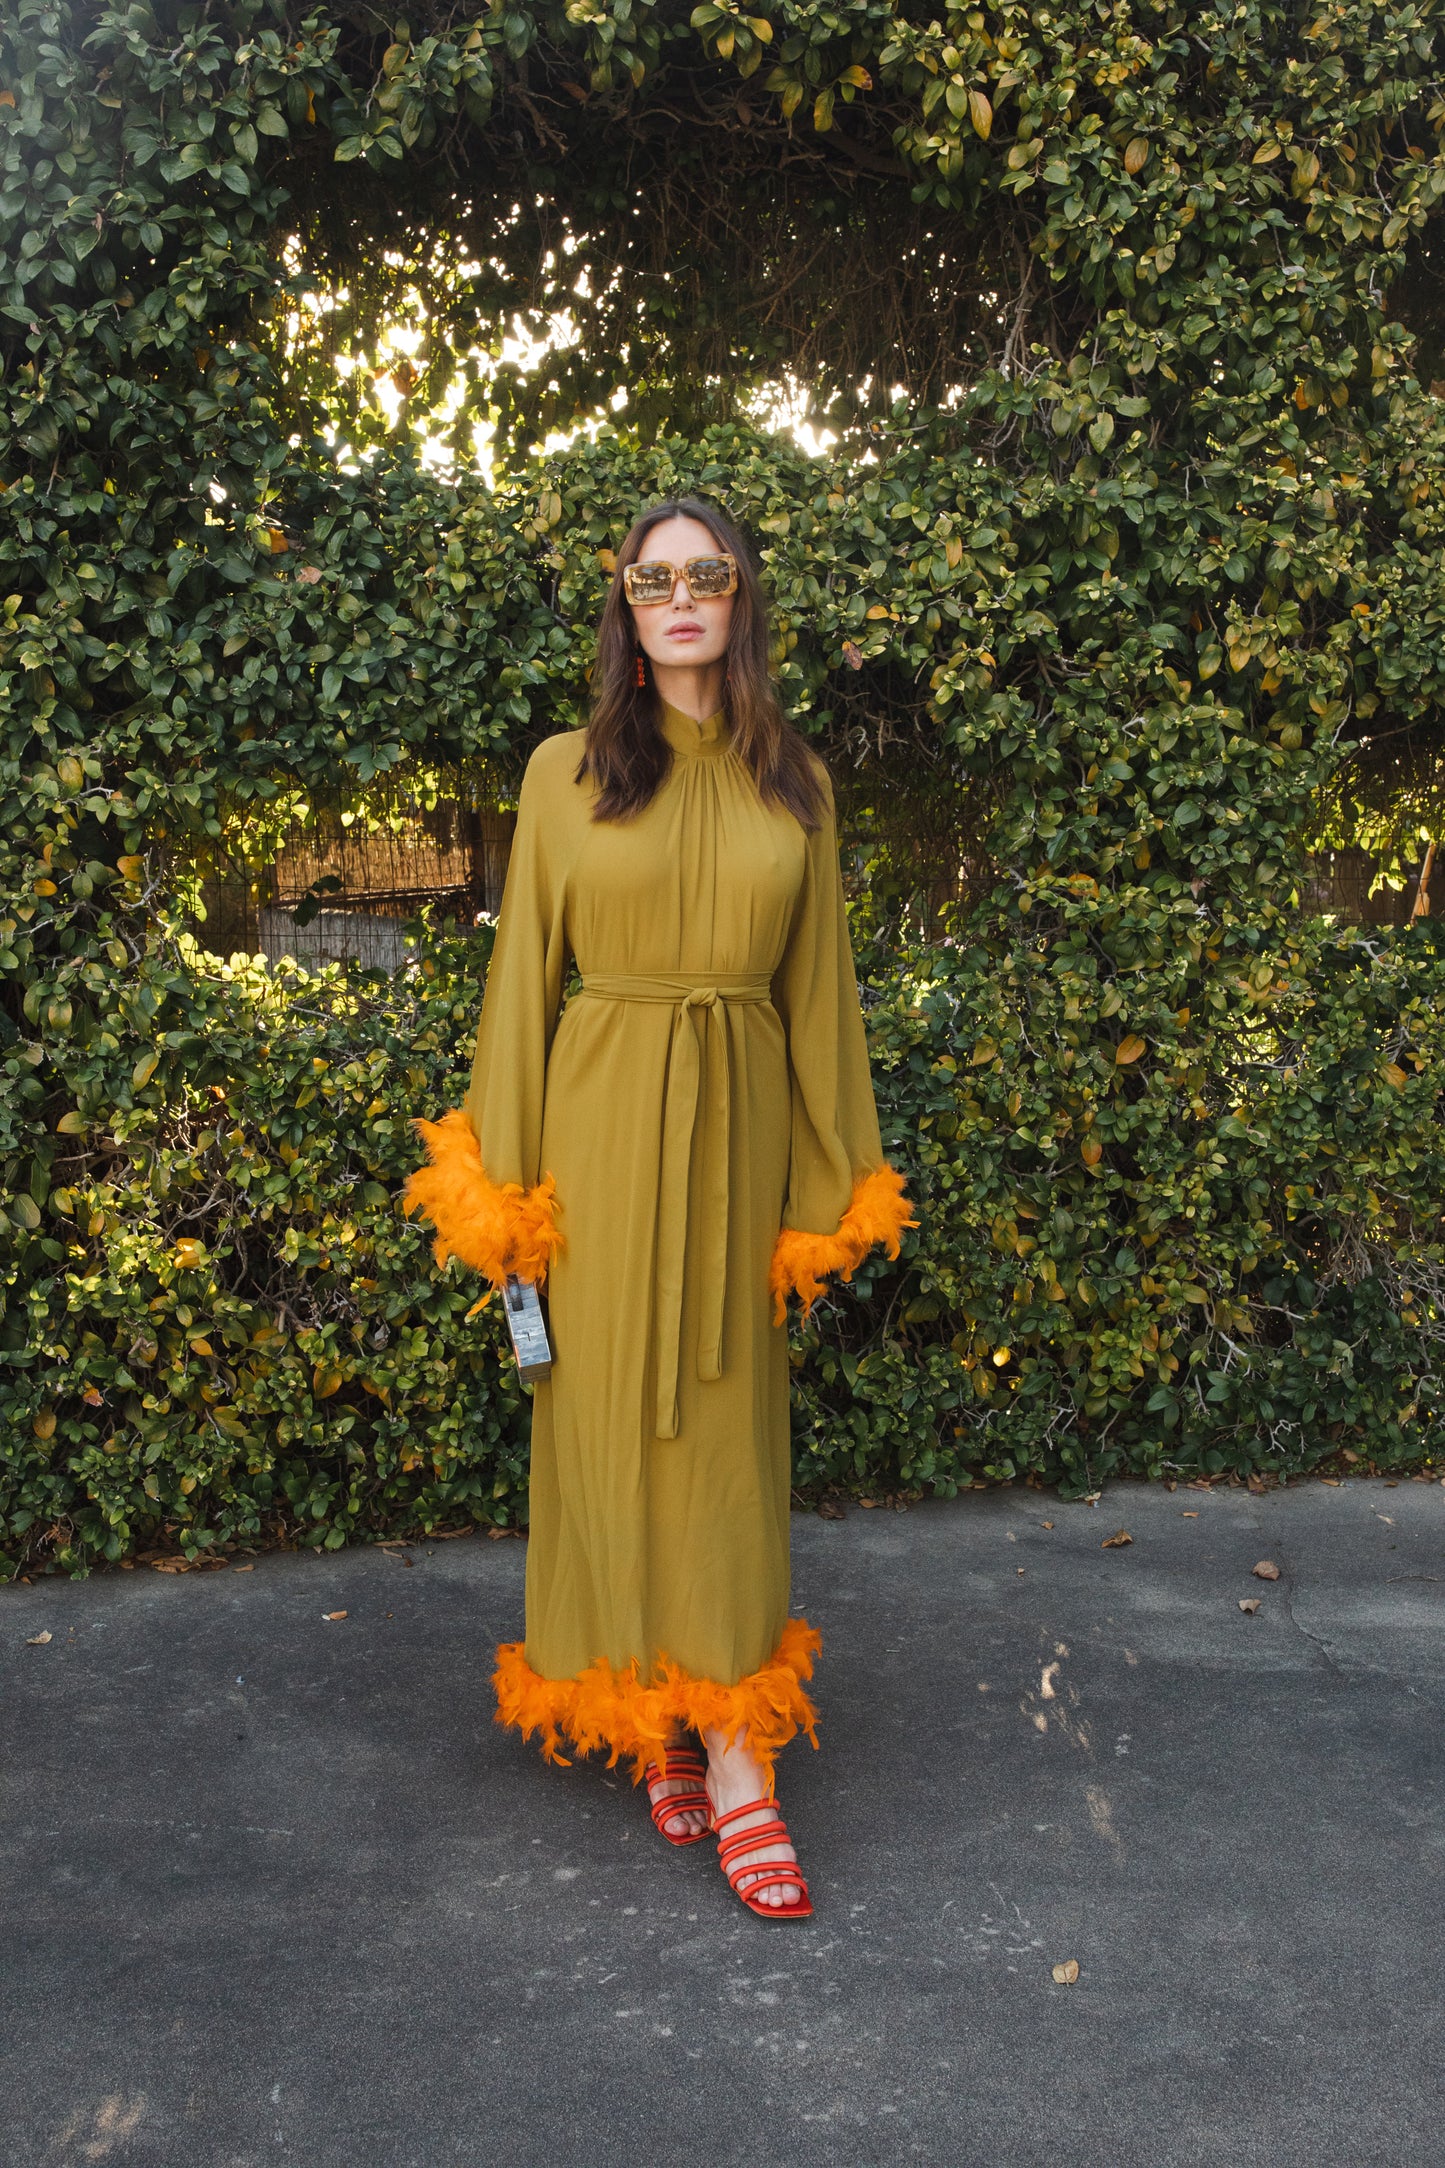 jennafer grace Darlene Roper Maxi Dress chartreuse yellow green mod dress with orange feathers at cuffs and hem high neck cinched waist tie retro 1960s 60s revival midcentury evening dress boho bohemian hippie romantic whimsical handmade in California USA